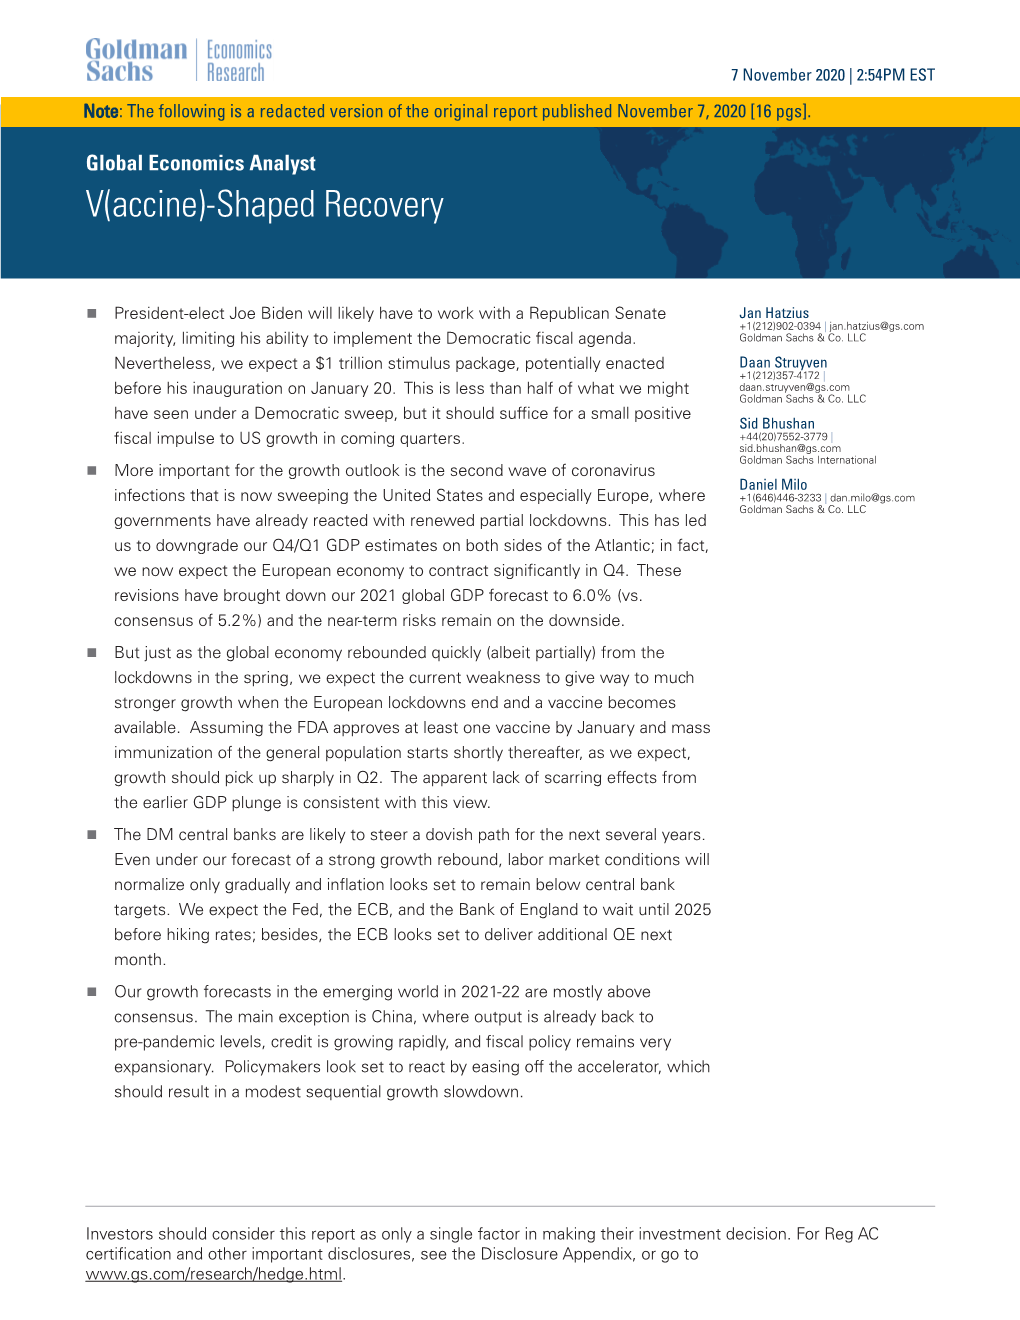 Global Economics Analyst V(Accine)-Shaped Recovery